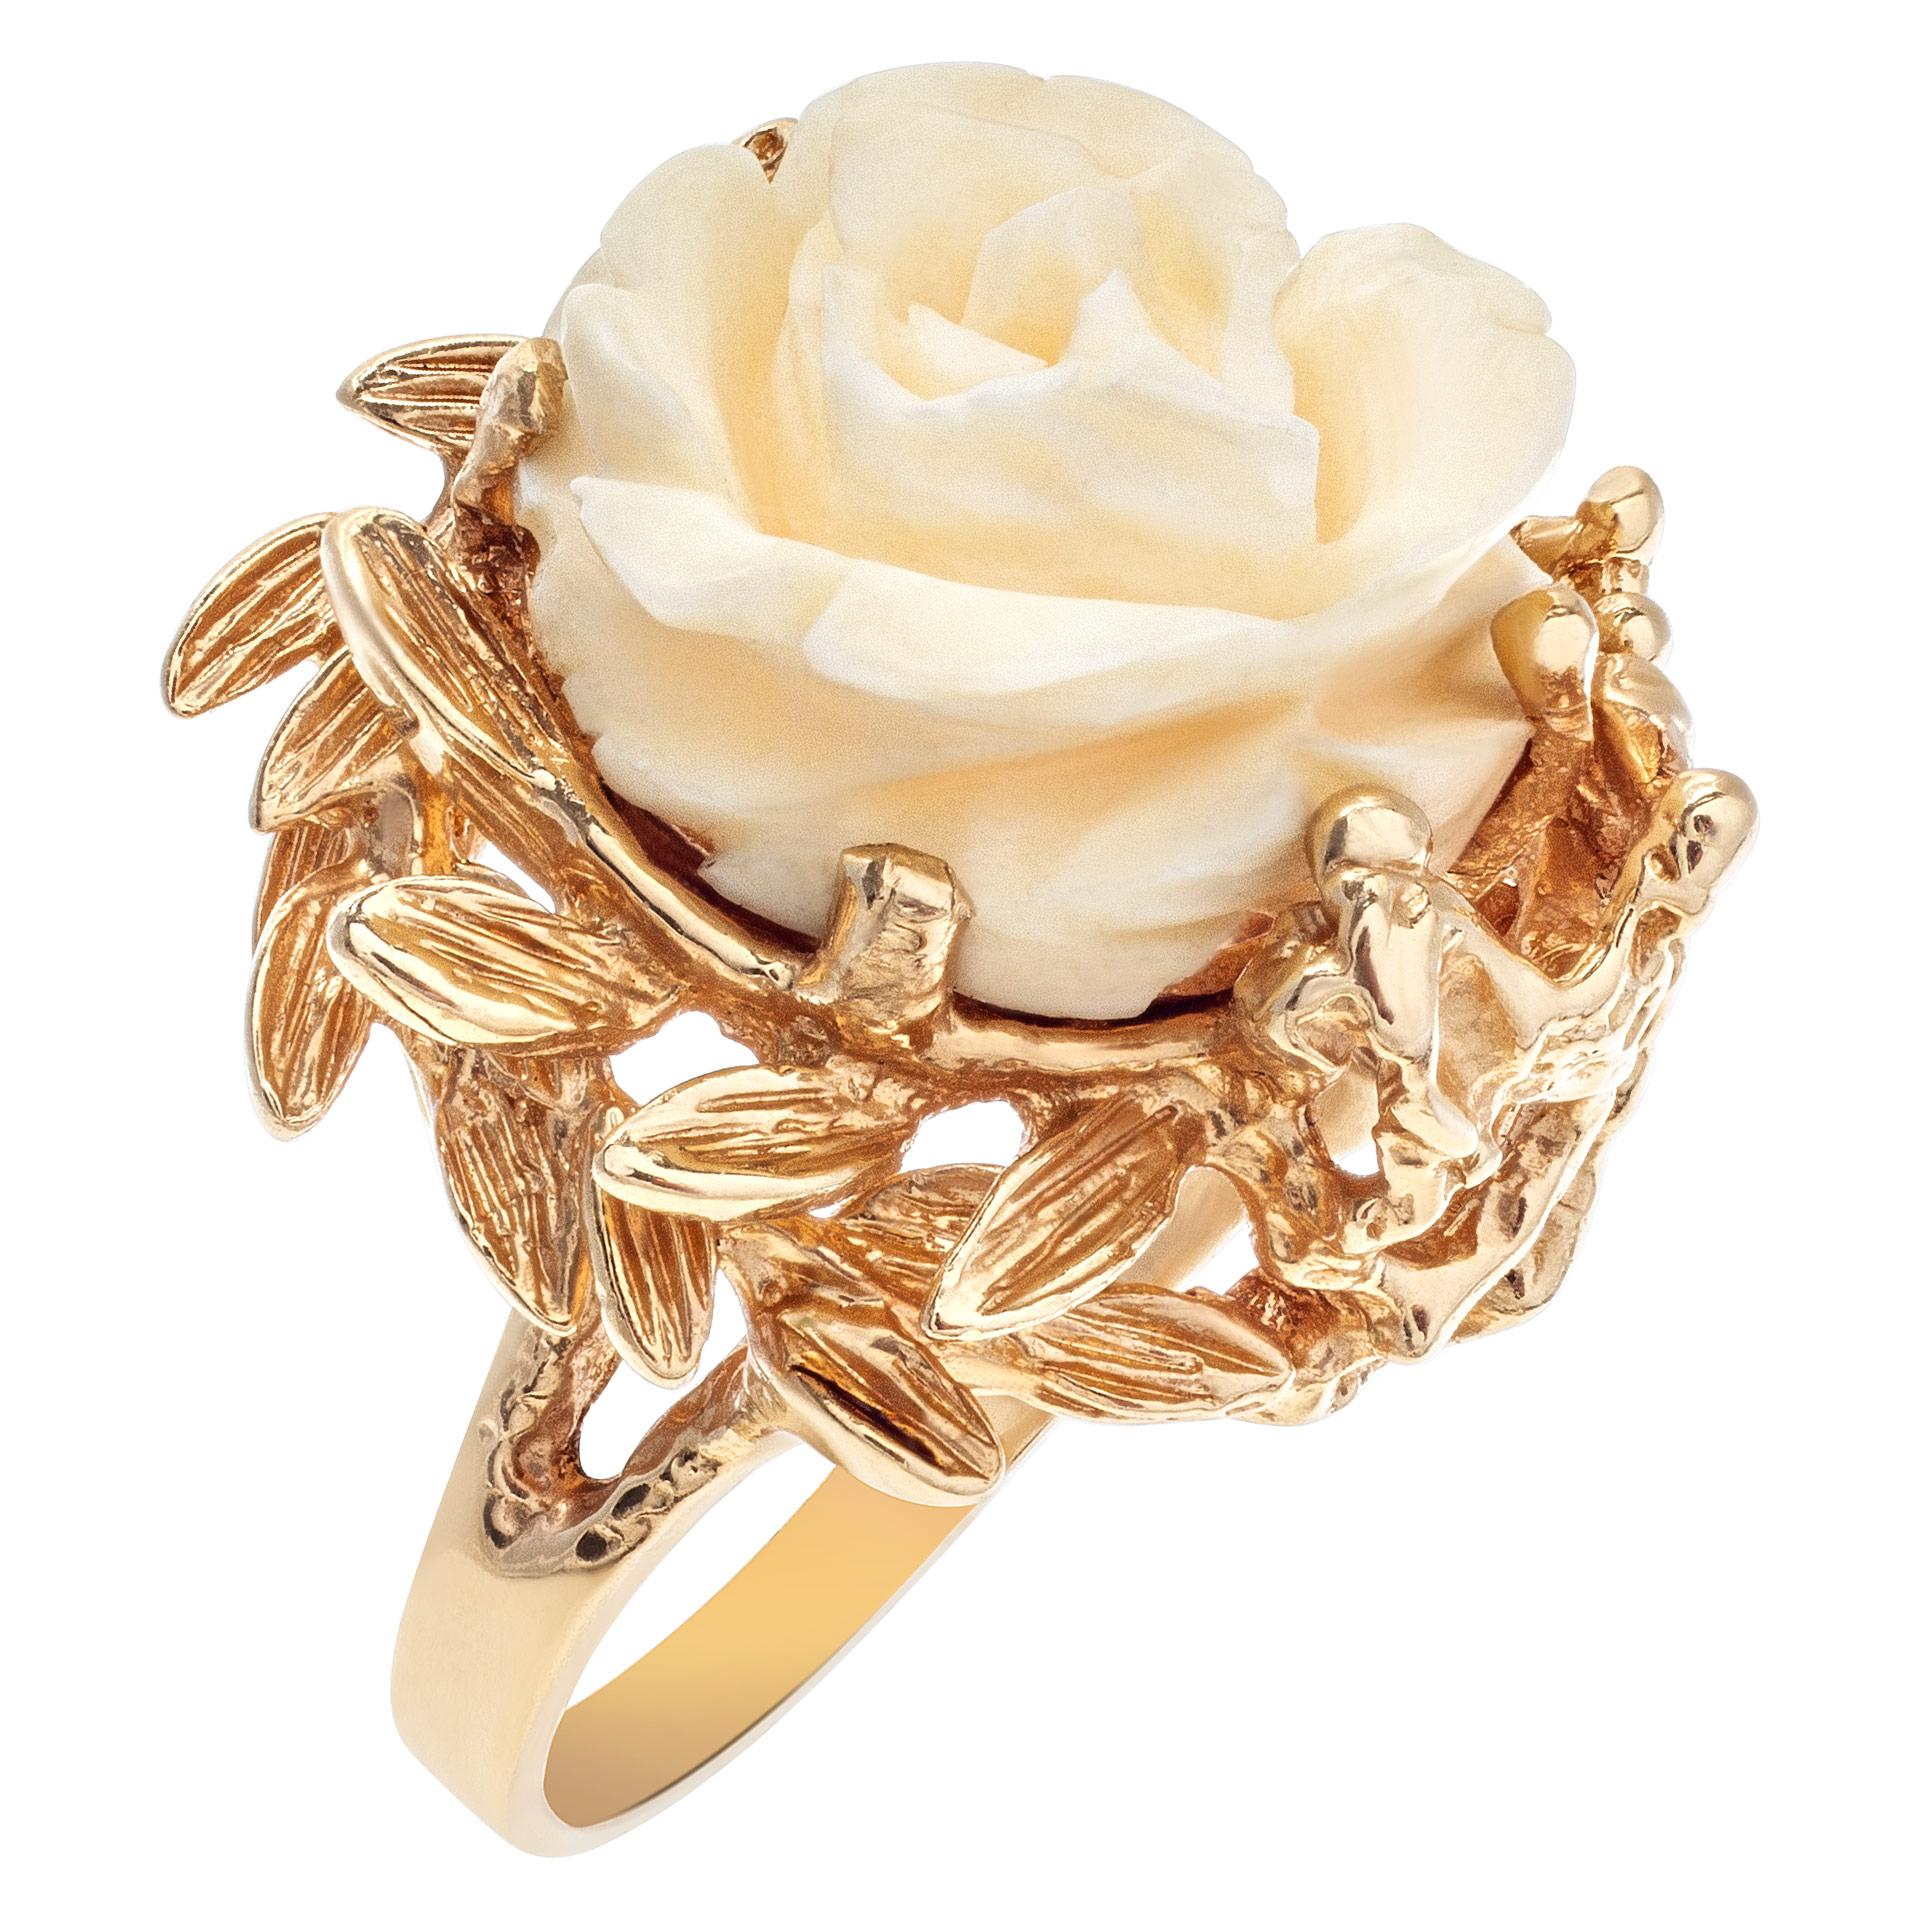 Beautifully carved angel skin coral rose motif ring in 14k yellow gold with accents of gold branches and leaves. Width at head: 21mm, width at shank: 2.5mm. Size 6.This ring is currently size 6 and some items can be sized up or down, please ask! It